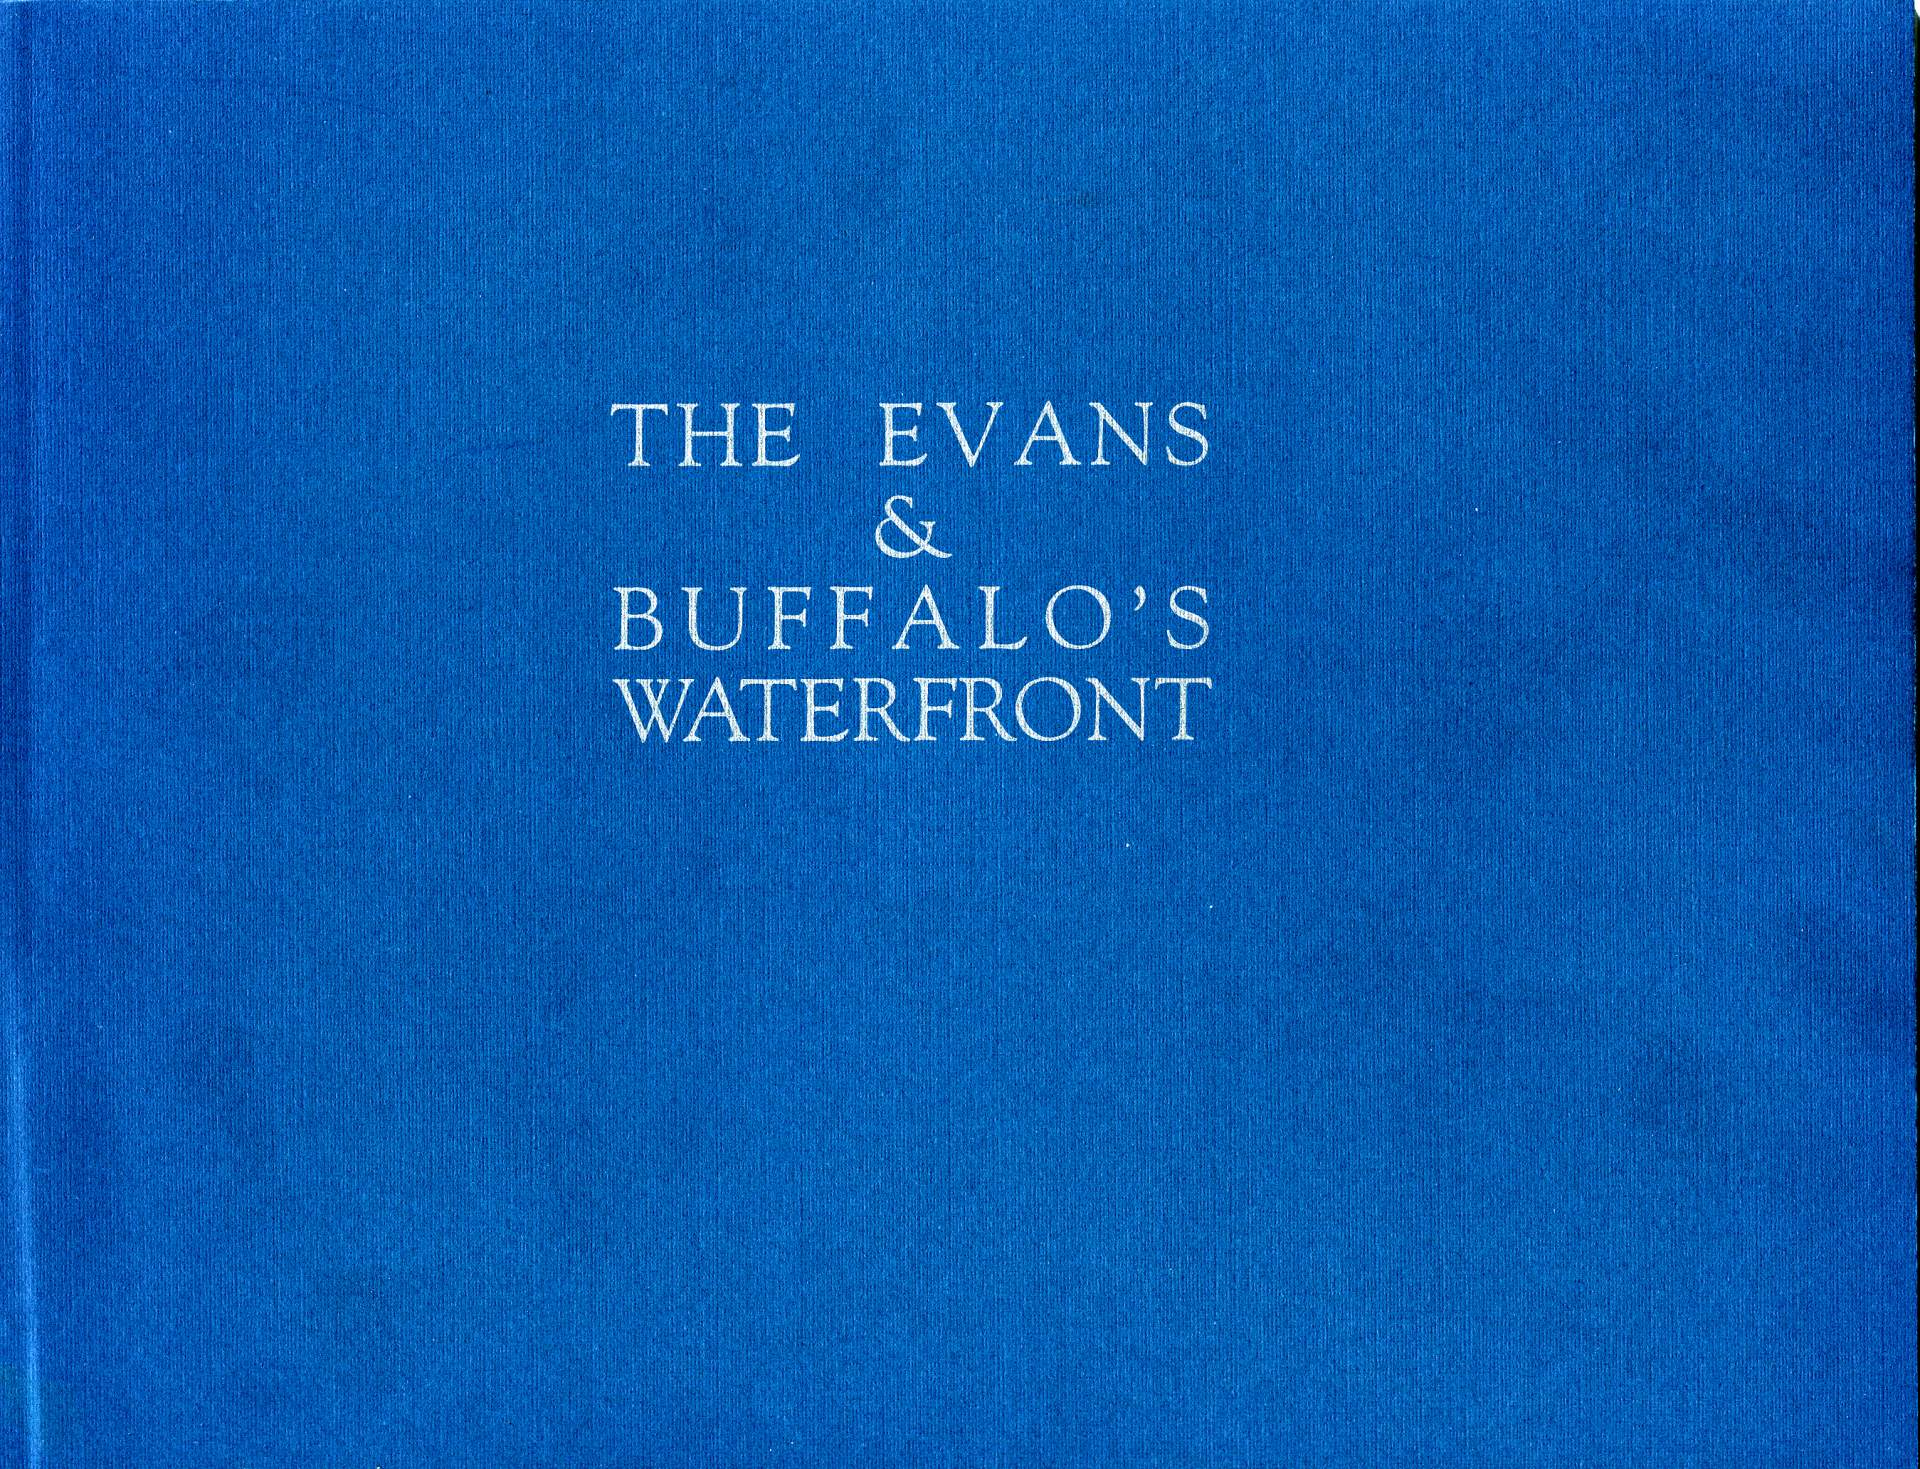 "Buffalo's Waterfront: A Tribute to James Carey Evans III" exhibition program cover